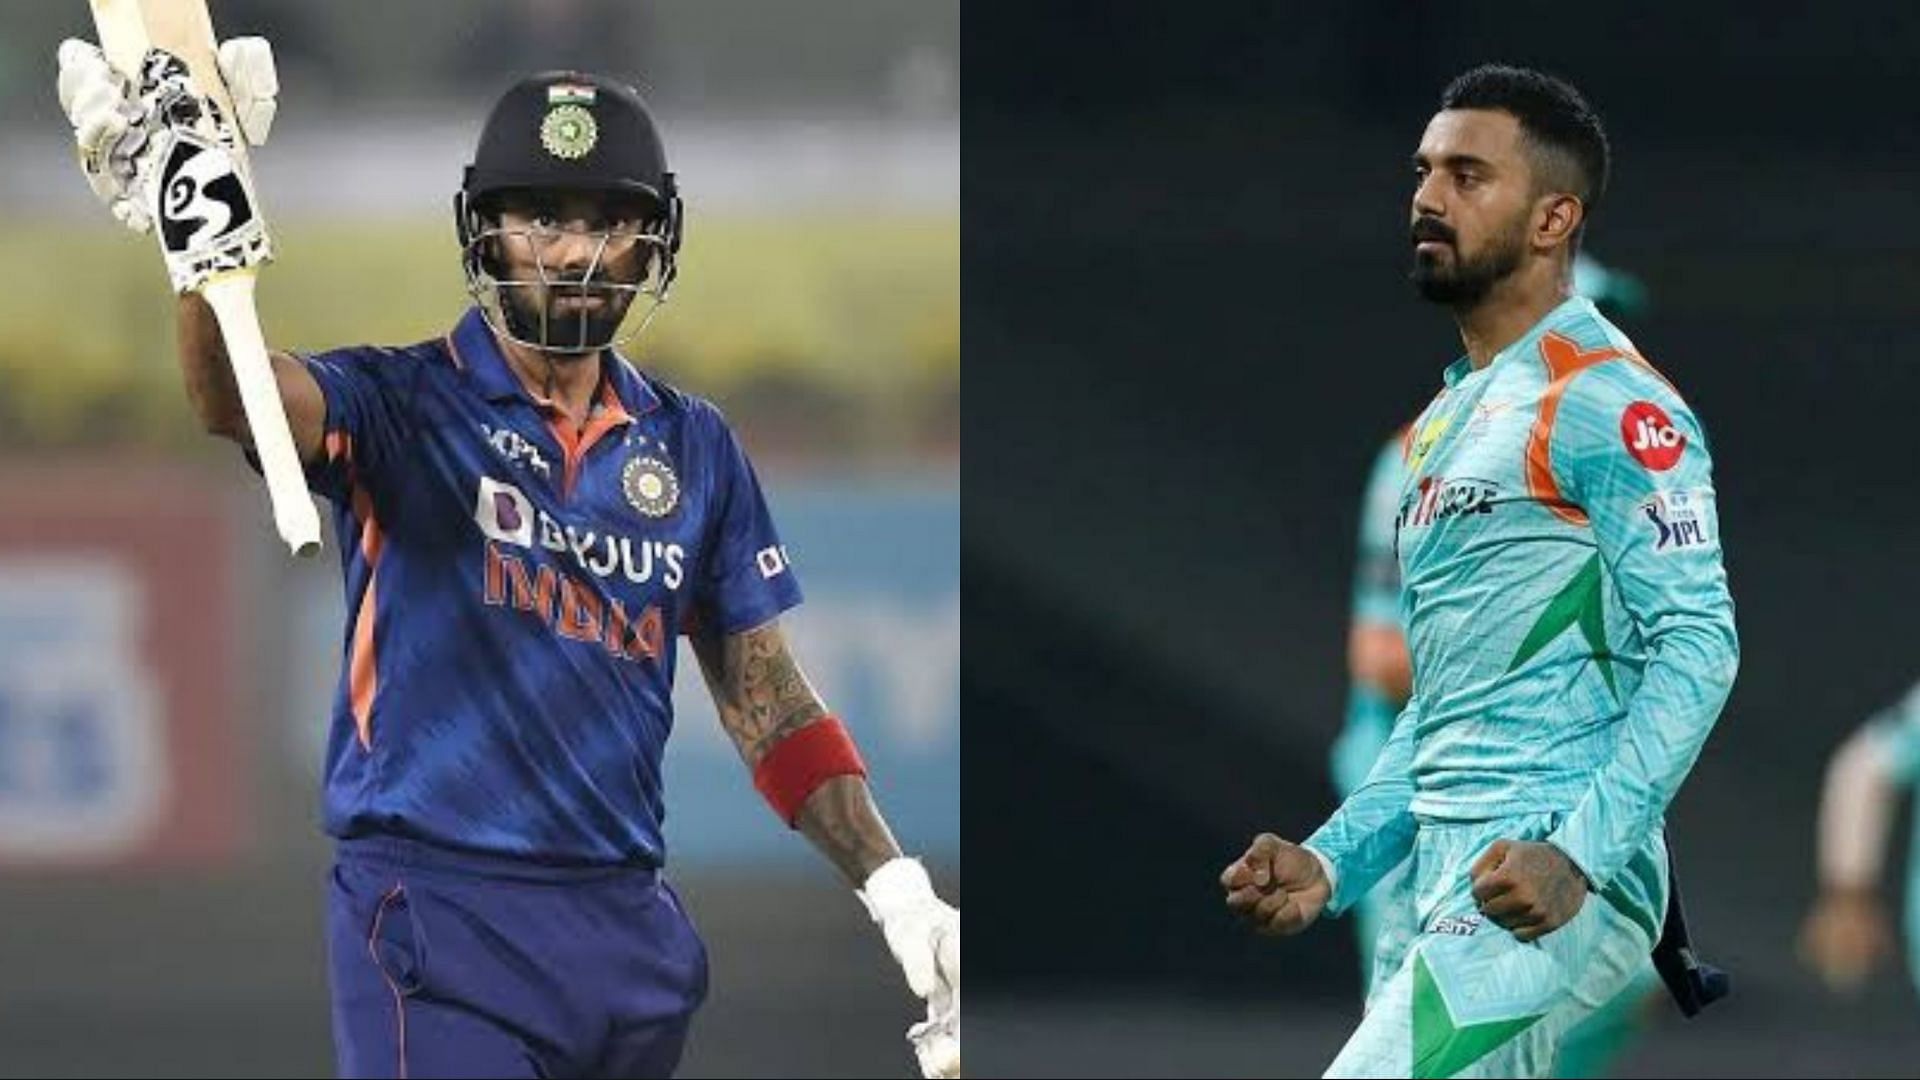 KL Rahul has achieved success while batting in the middle-order for India in ODIs